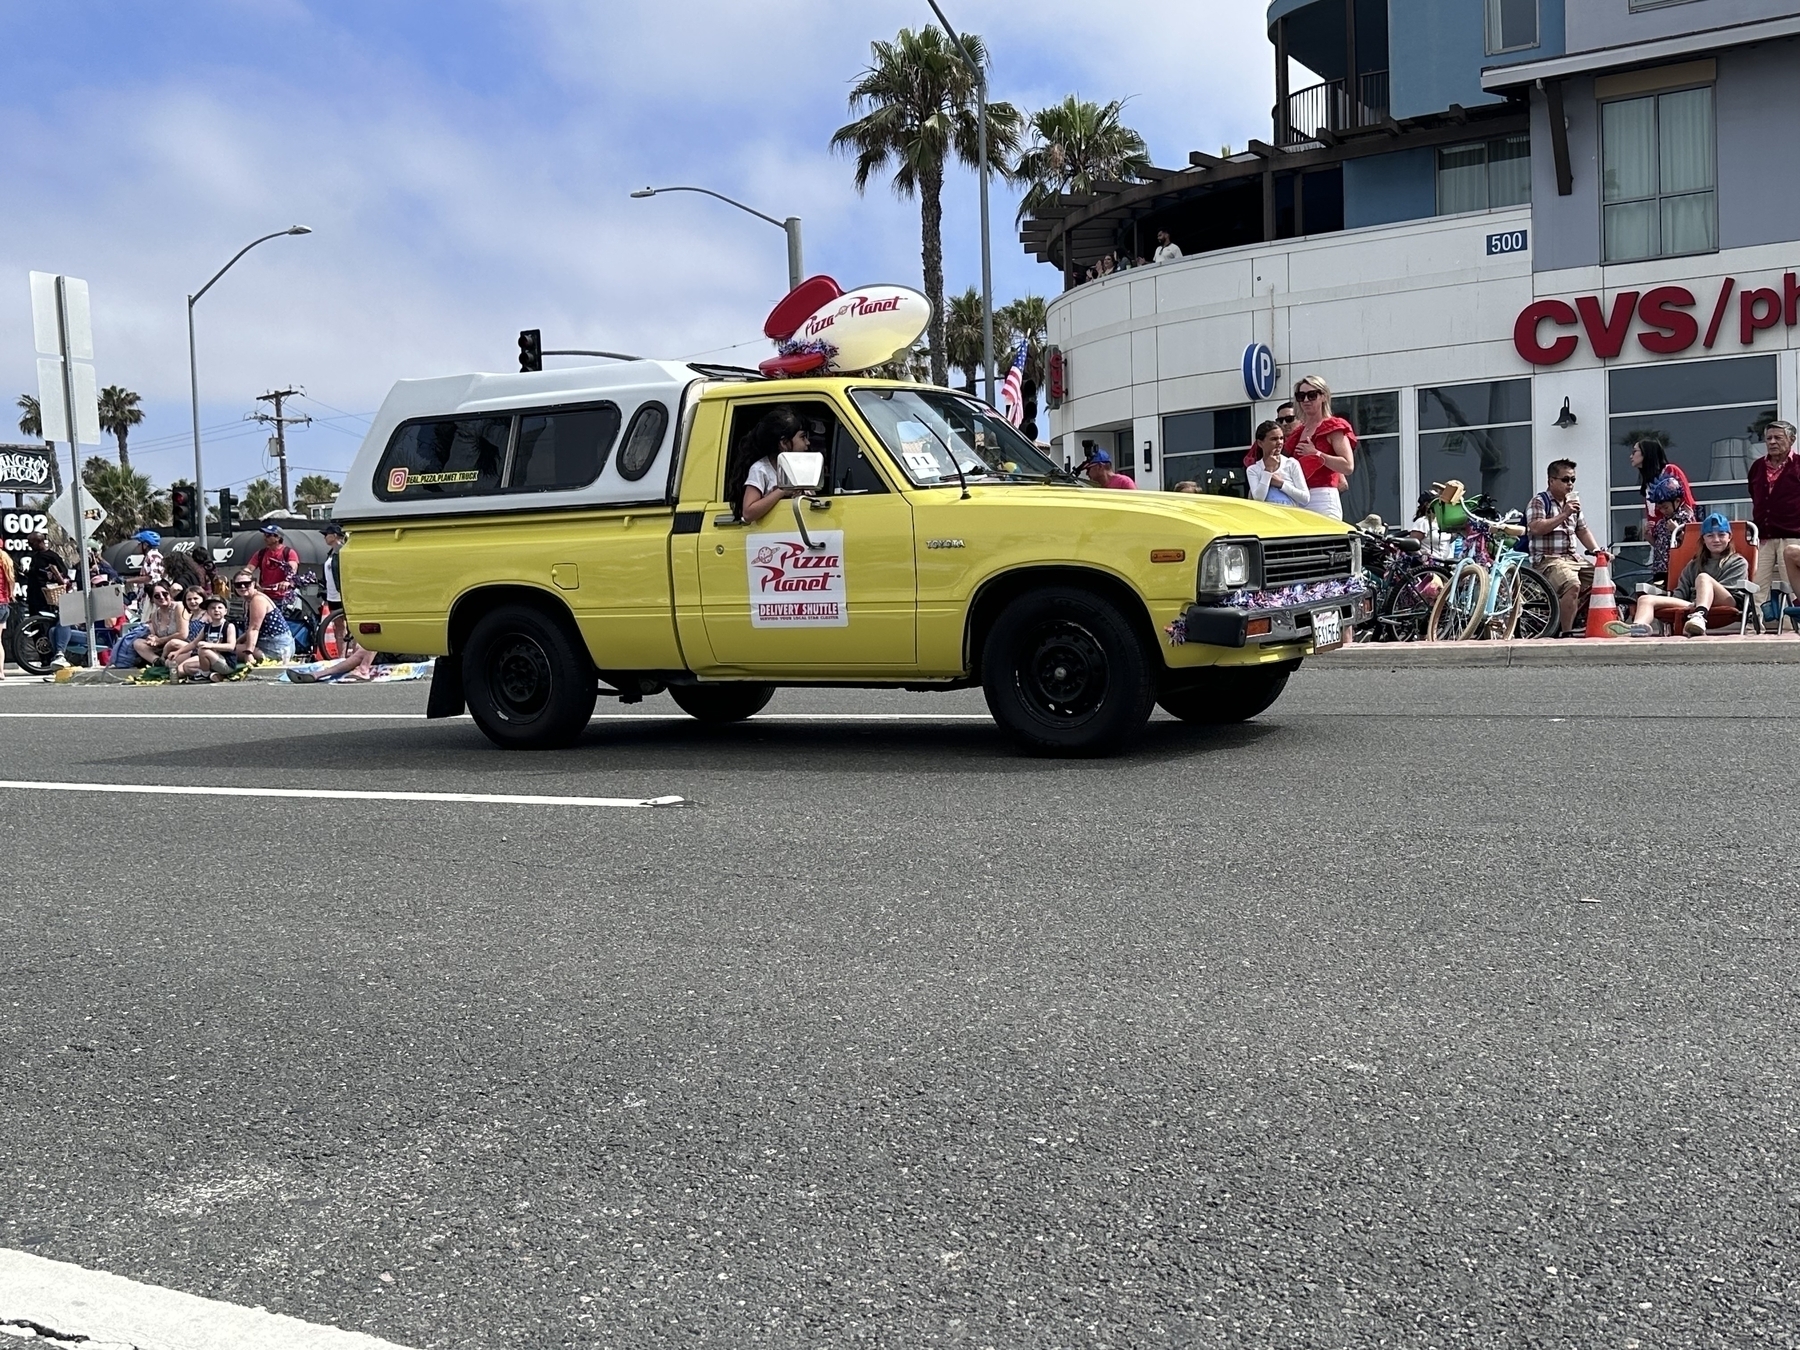 The Toy Story Pizza Planet delivery truck replica driving in a Fourth of July parade.